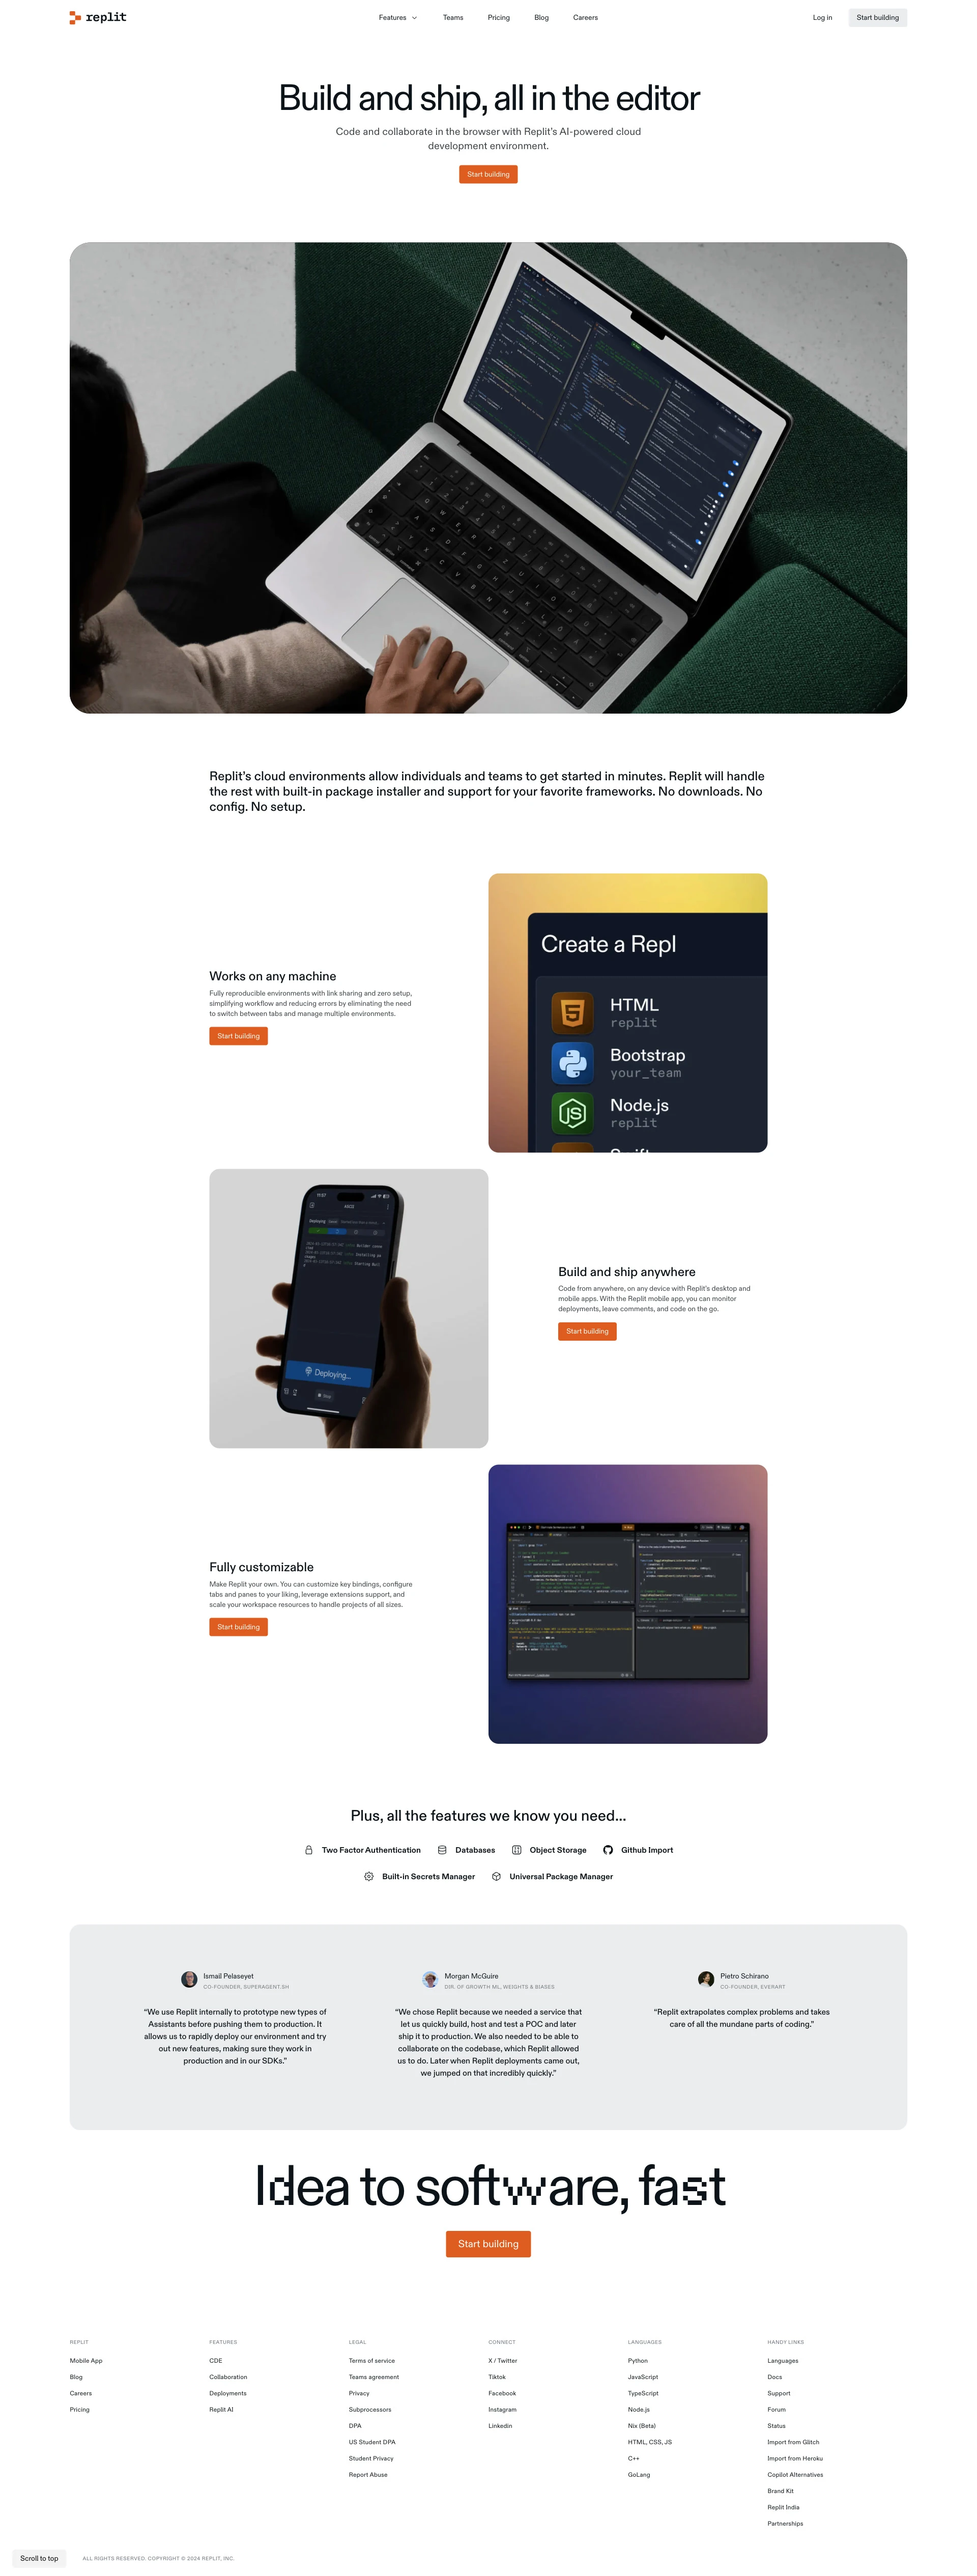 Replit Landing Page Example: Replit is an AI-driven software creation platform where everyone can build, share, and ship software fast.